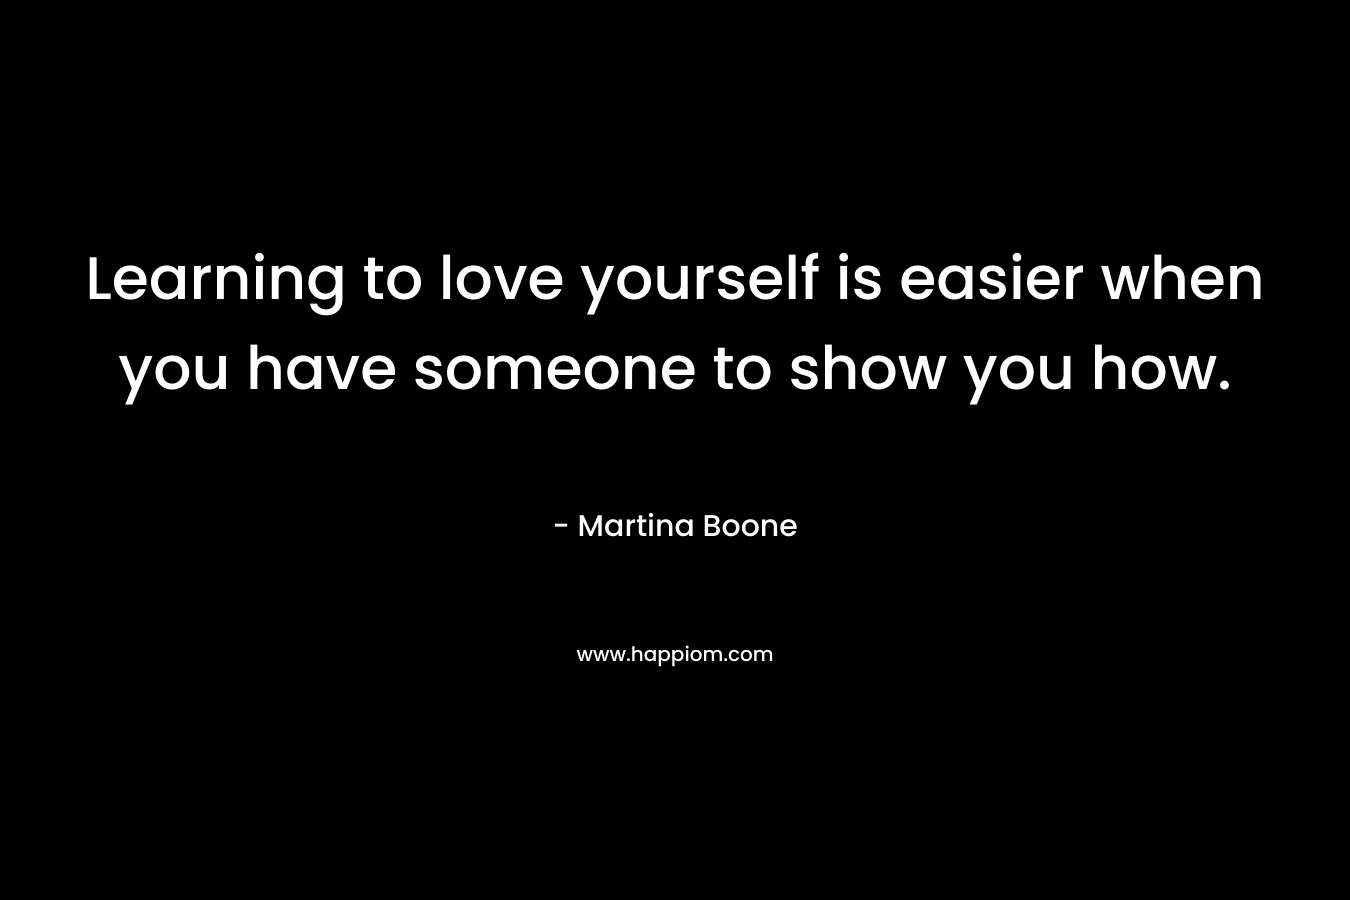 Learning to love yourself is easier when you have someone to show you how.